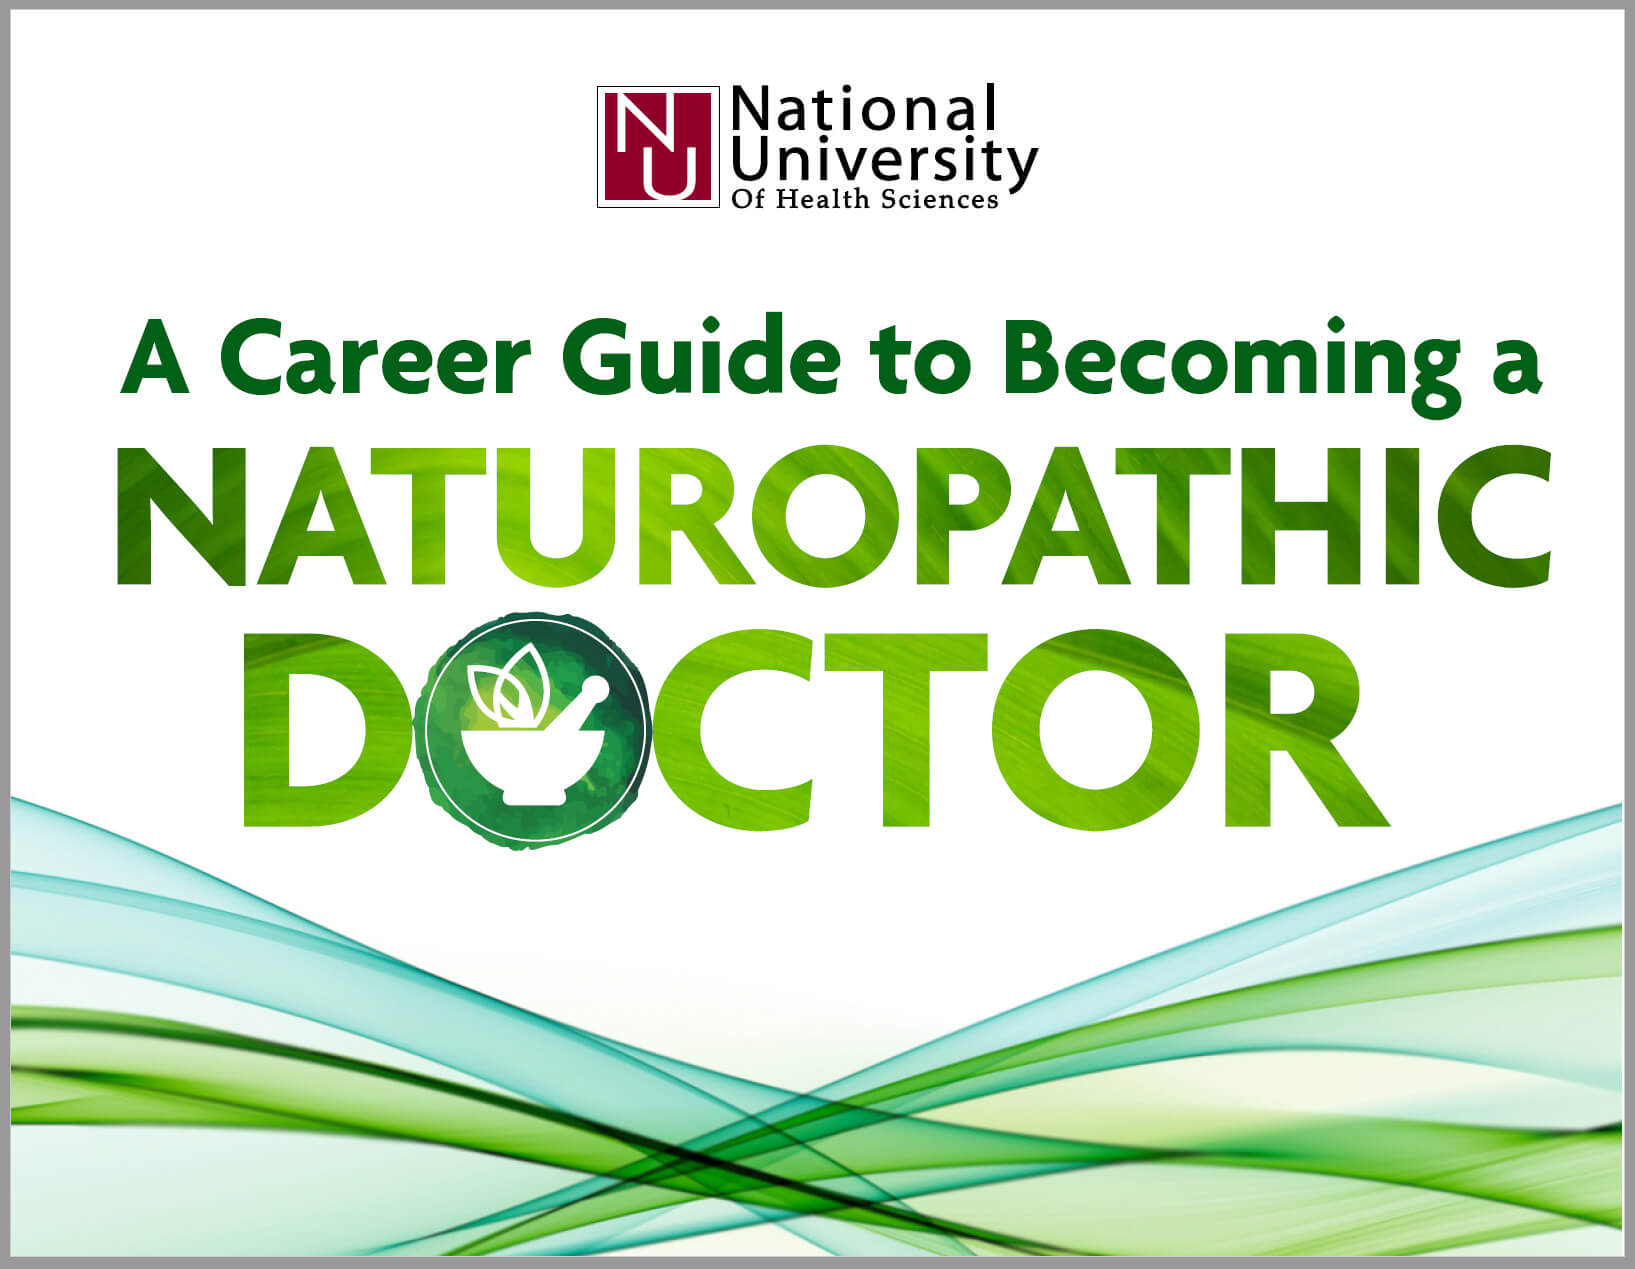 a career guide to naturopathic doctor cover